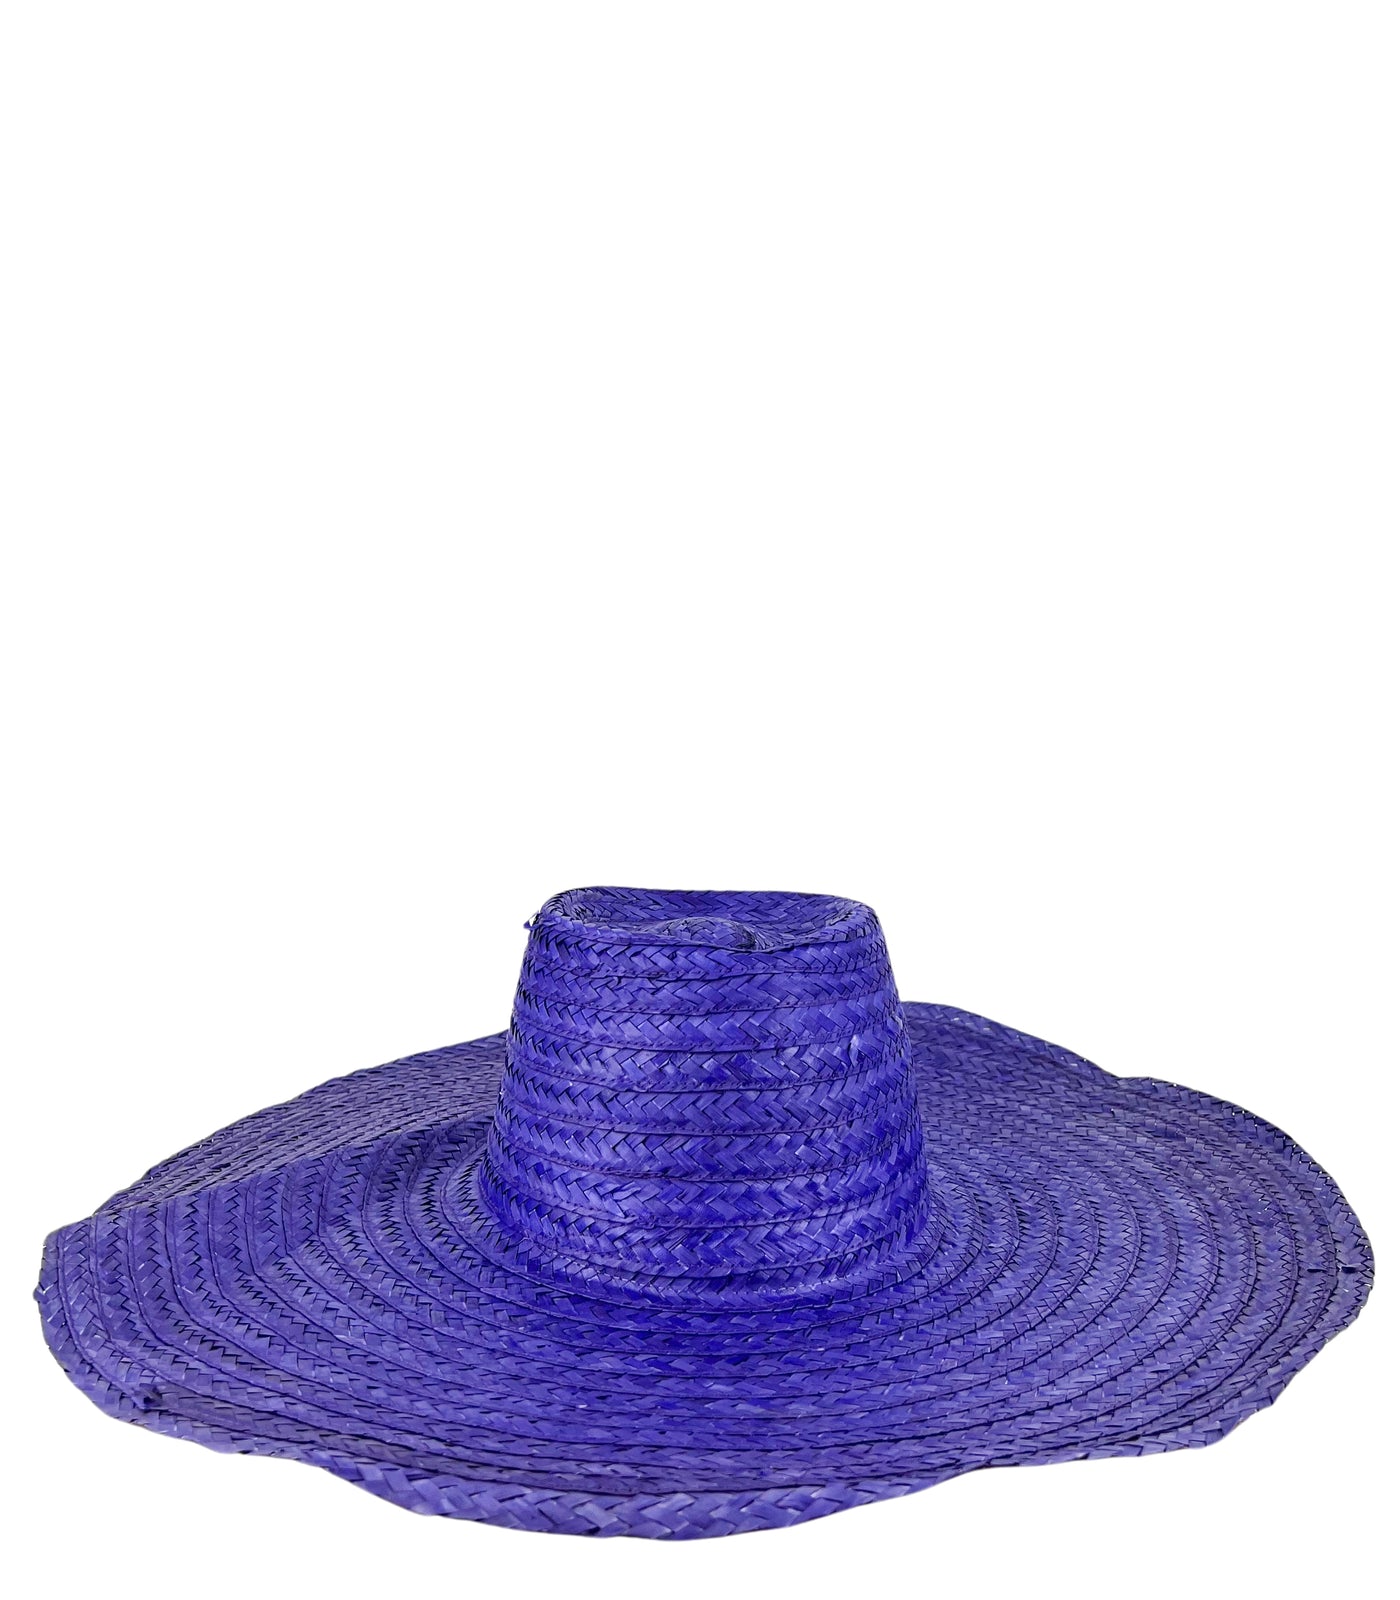 Reinhard Plank Painted Straw Hat in Purple - Discounts on Reinhard Plank at UAL